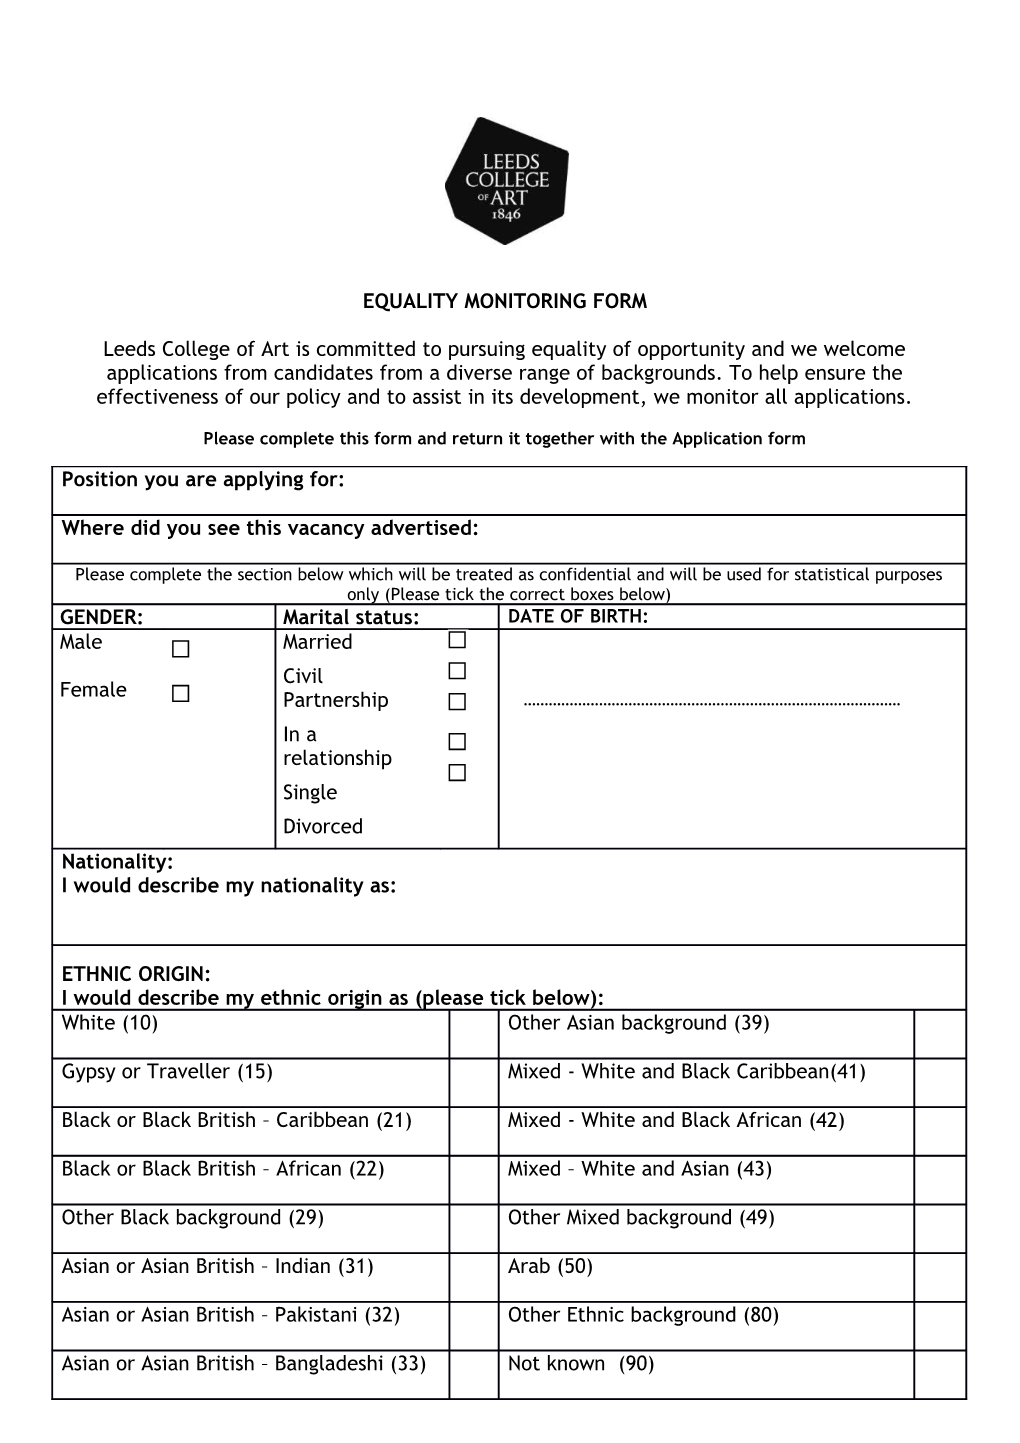 Please Complete This Form and Return It Together with the Application Form